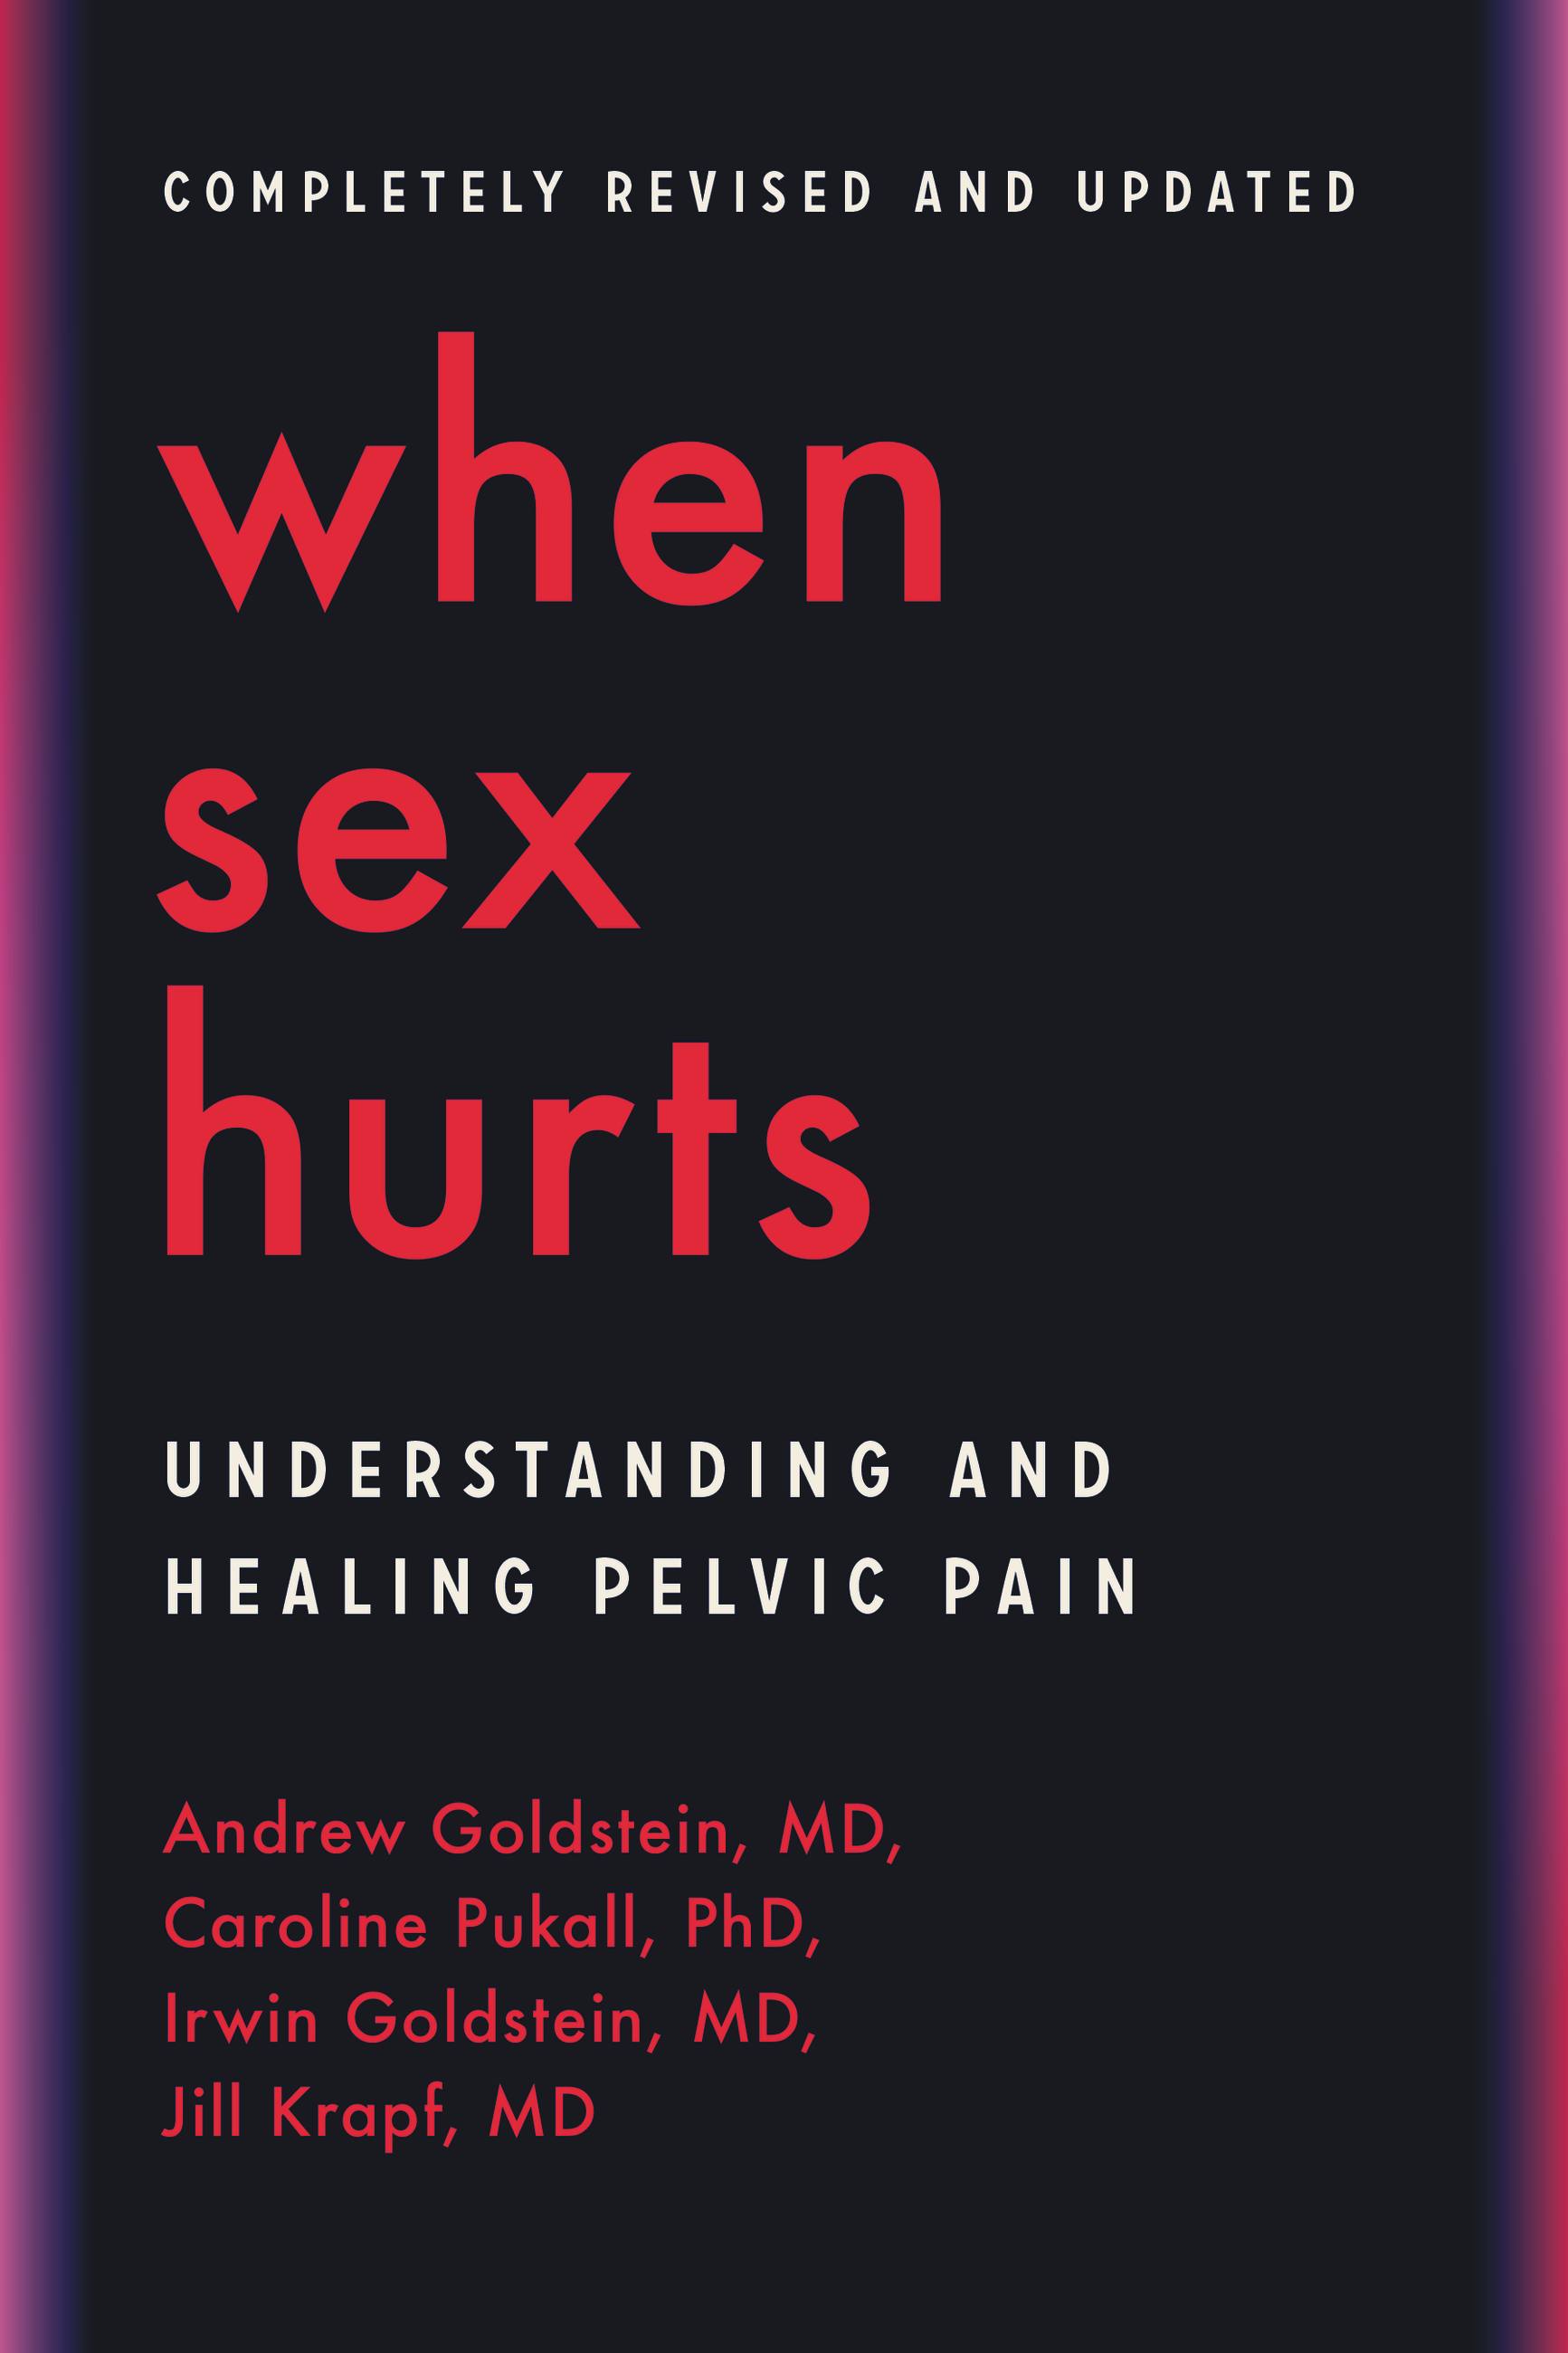 When Sex Hurts by Andrew Goldstein, MD Hachette Book Group